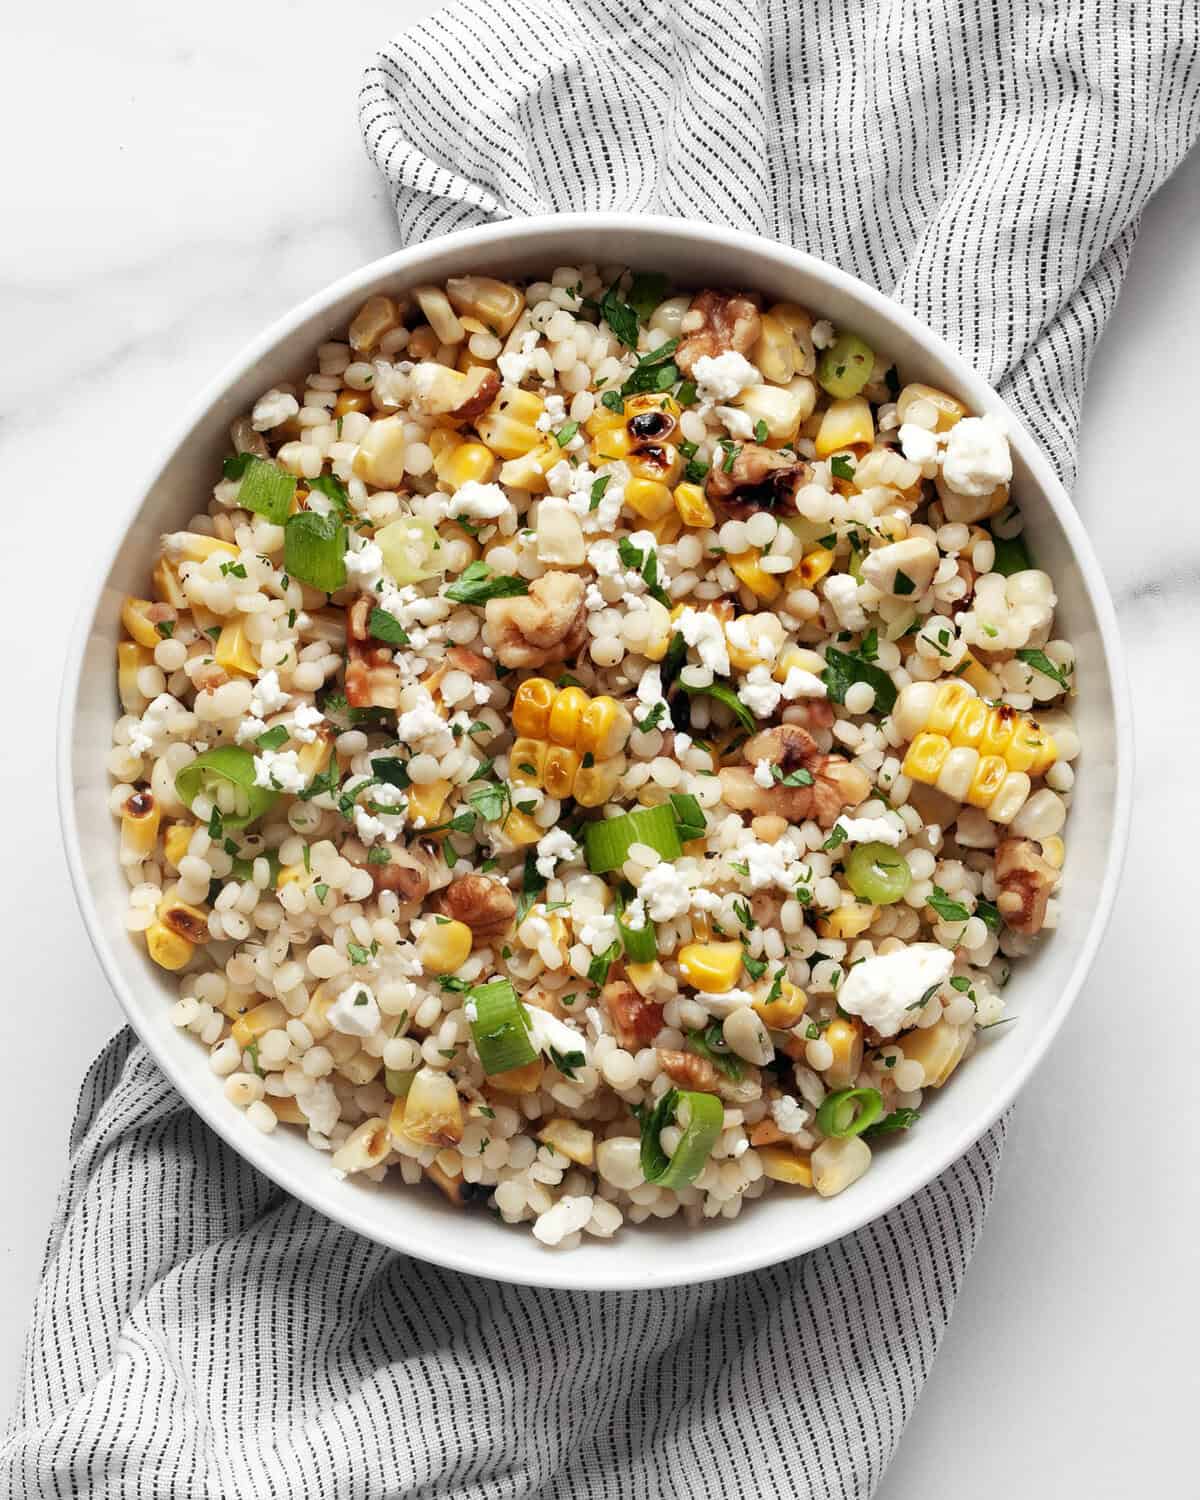 Grilled corn pearl couscous in a bowl.